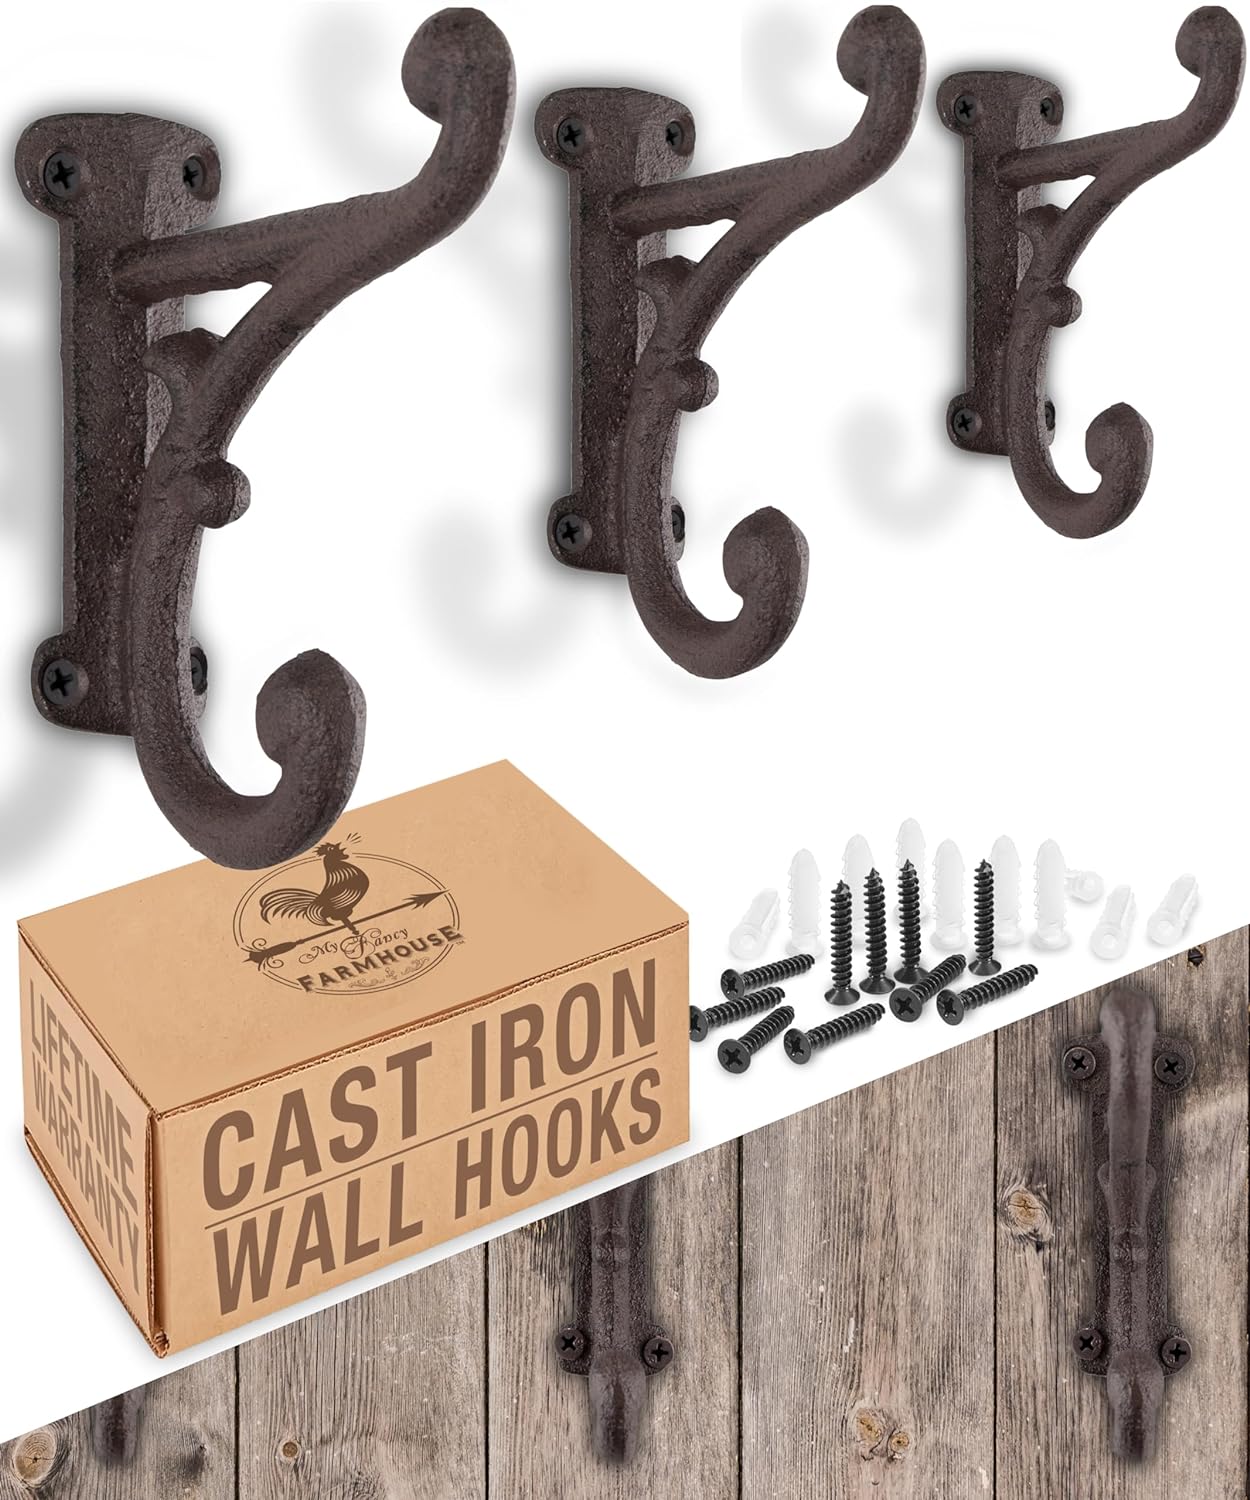 Vintage Cast Iron Wall Hooks (Set of 4) - Rustic, Farmhouse, Shabby Chic,  French Country Coat Hooks, Great for Coats, Bags, Towels, Hats